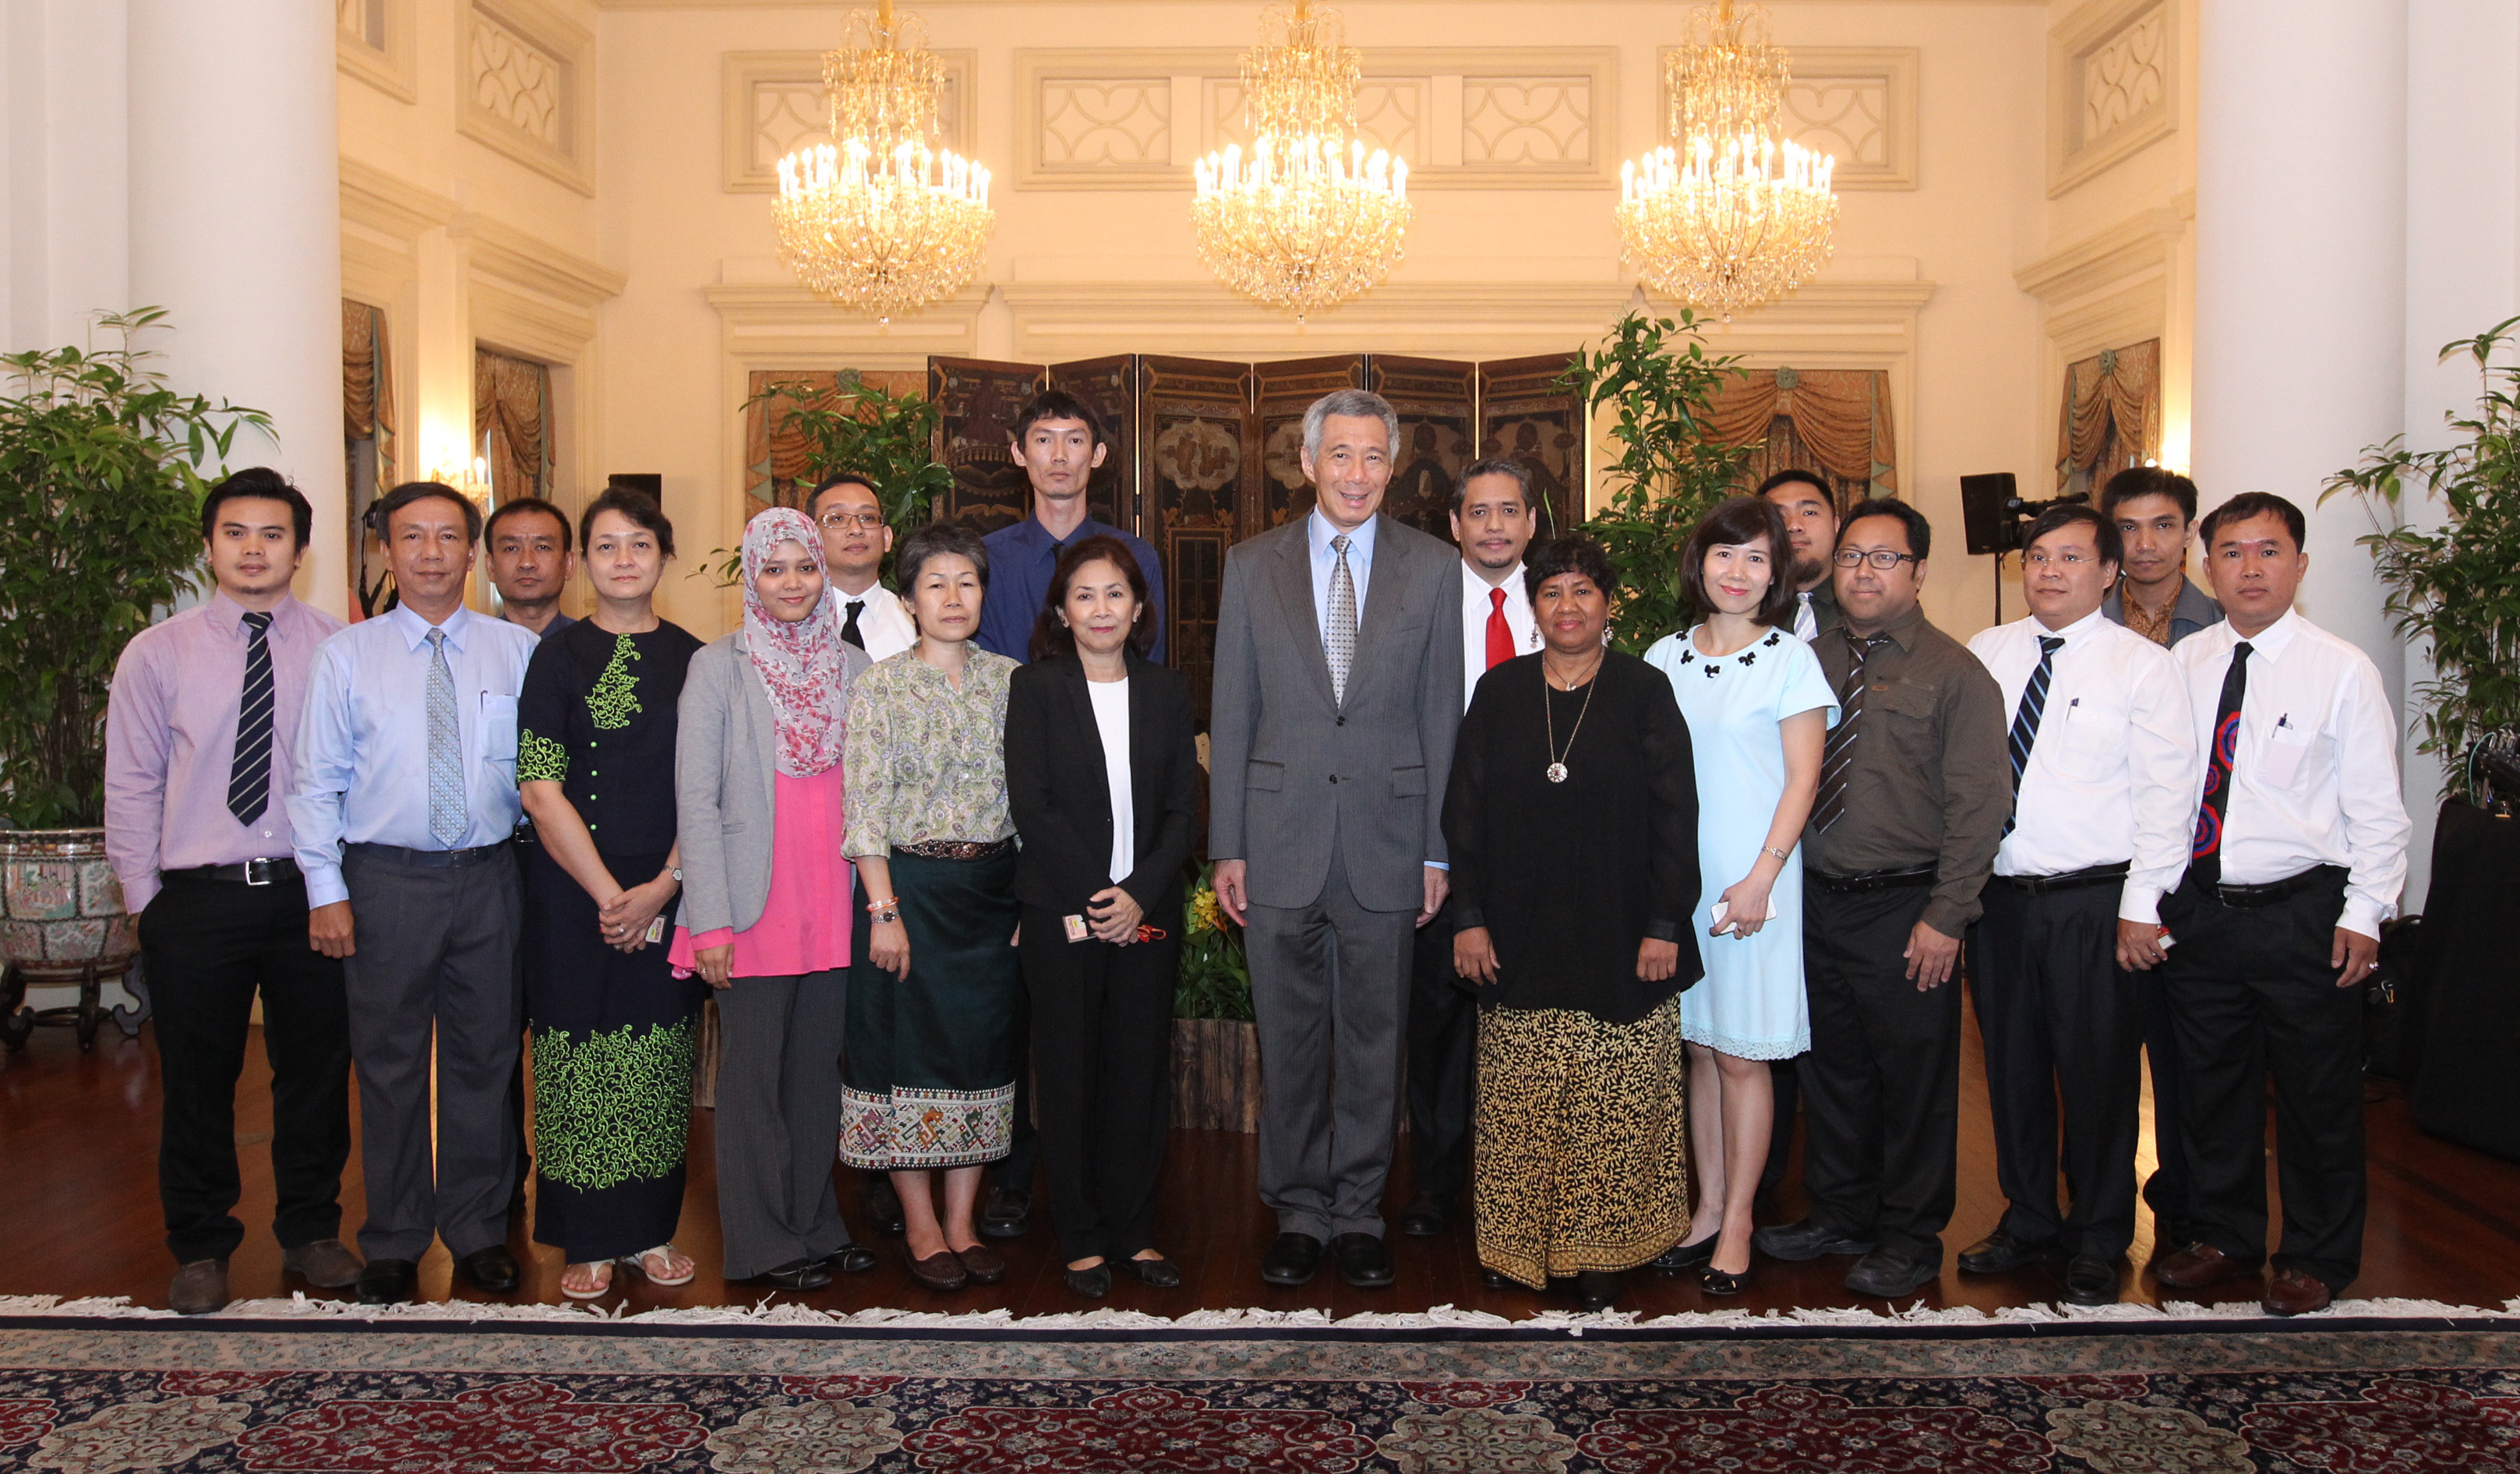 PM Lee's interview with participants of the 7th ASEAN Journalists Visit Programme at the Istana on 4 Jun 2015 (MCI Photo by Chwee)